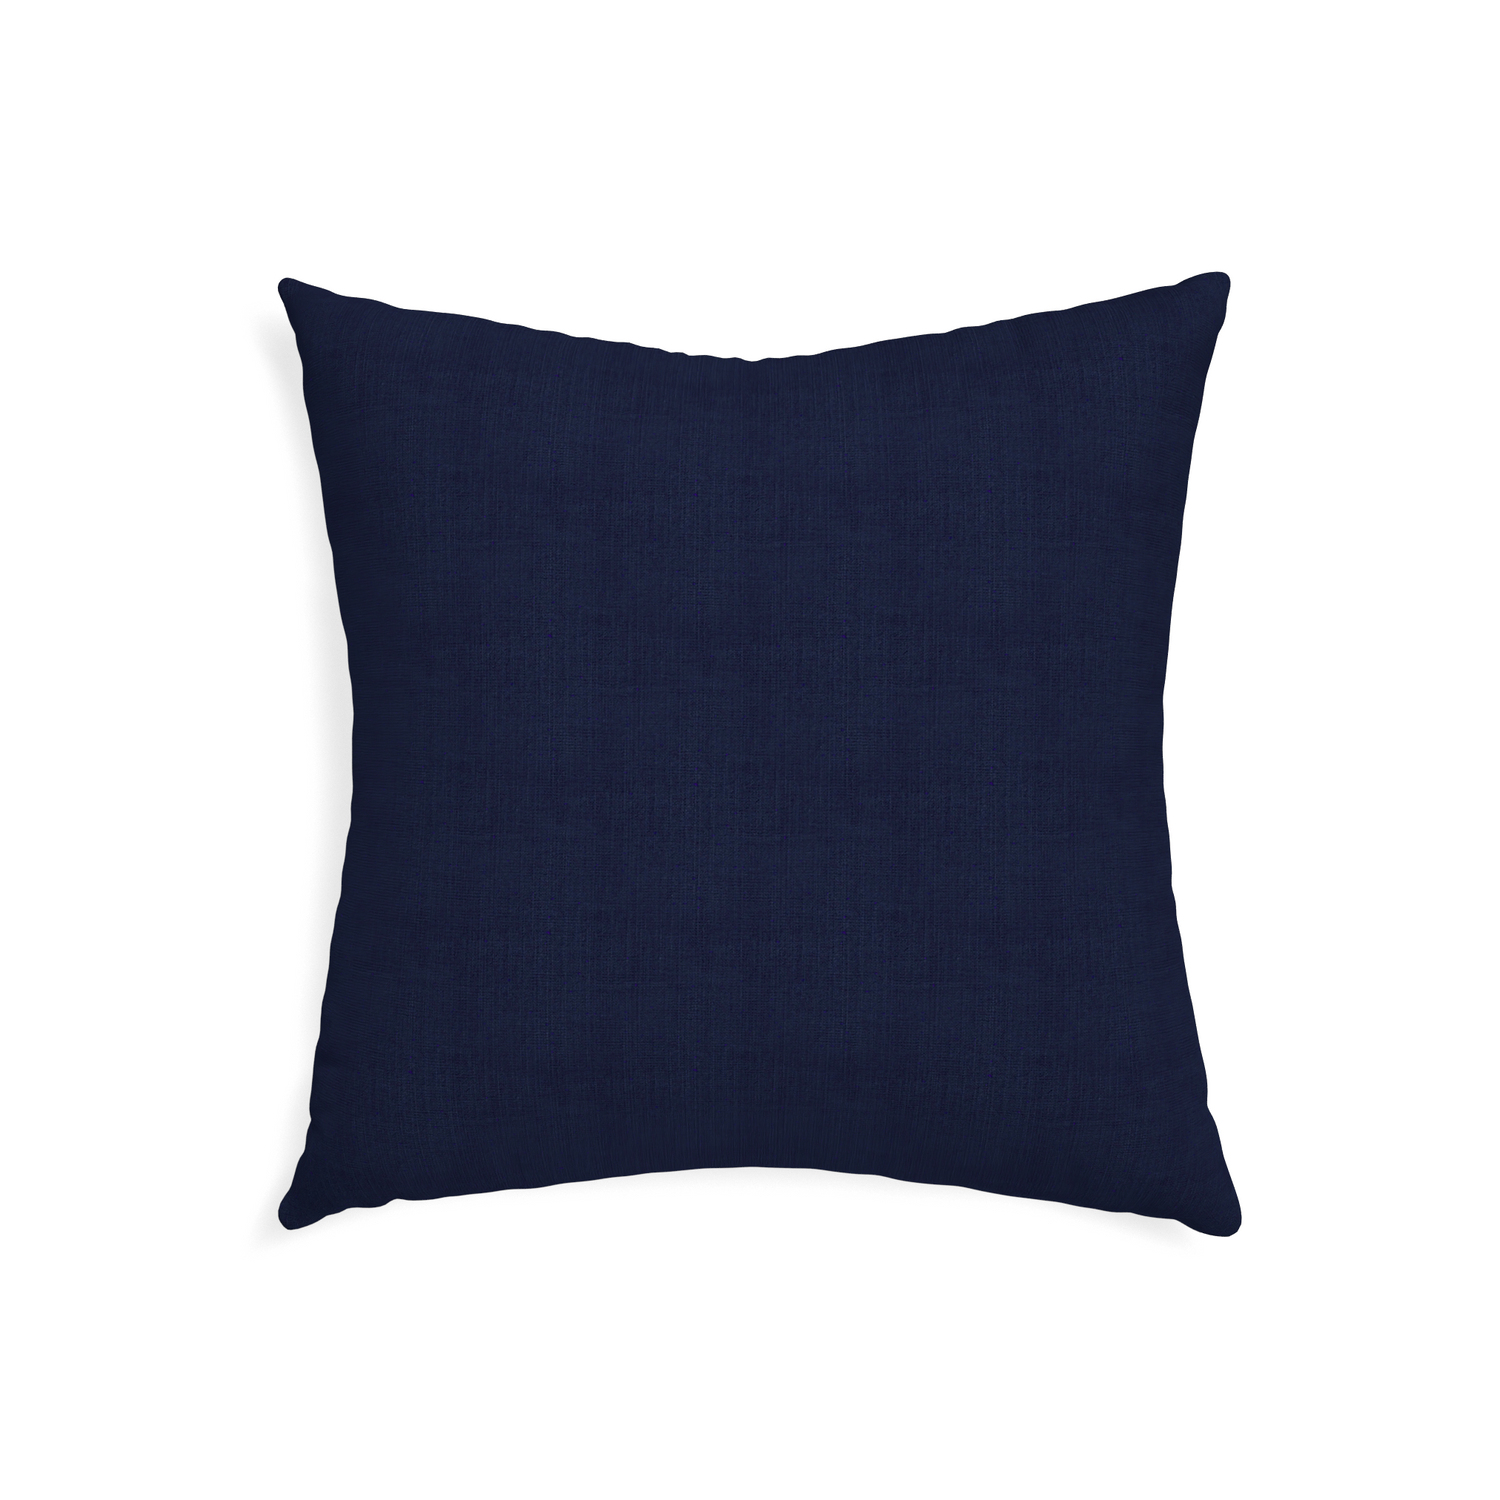 22-square midnight custom navy bluepillow with none on white background